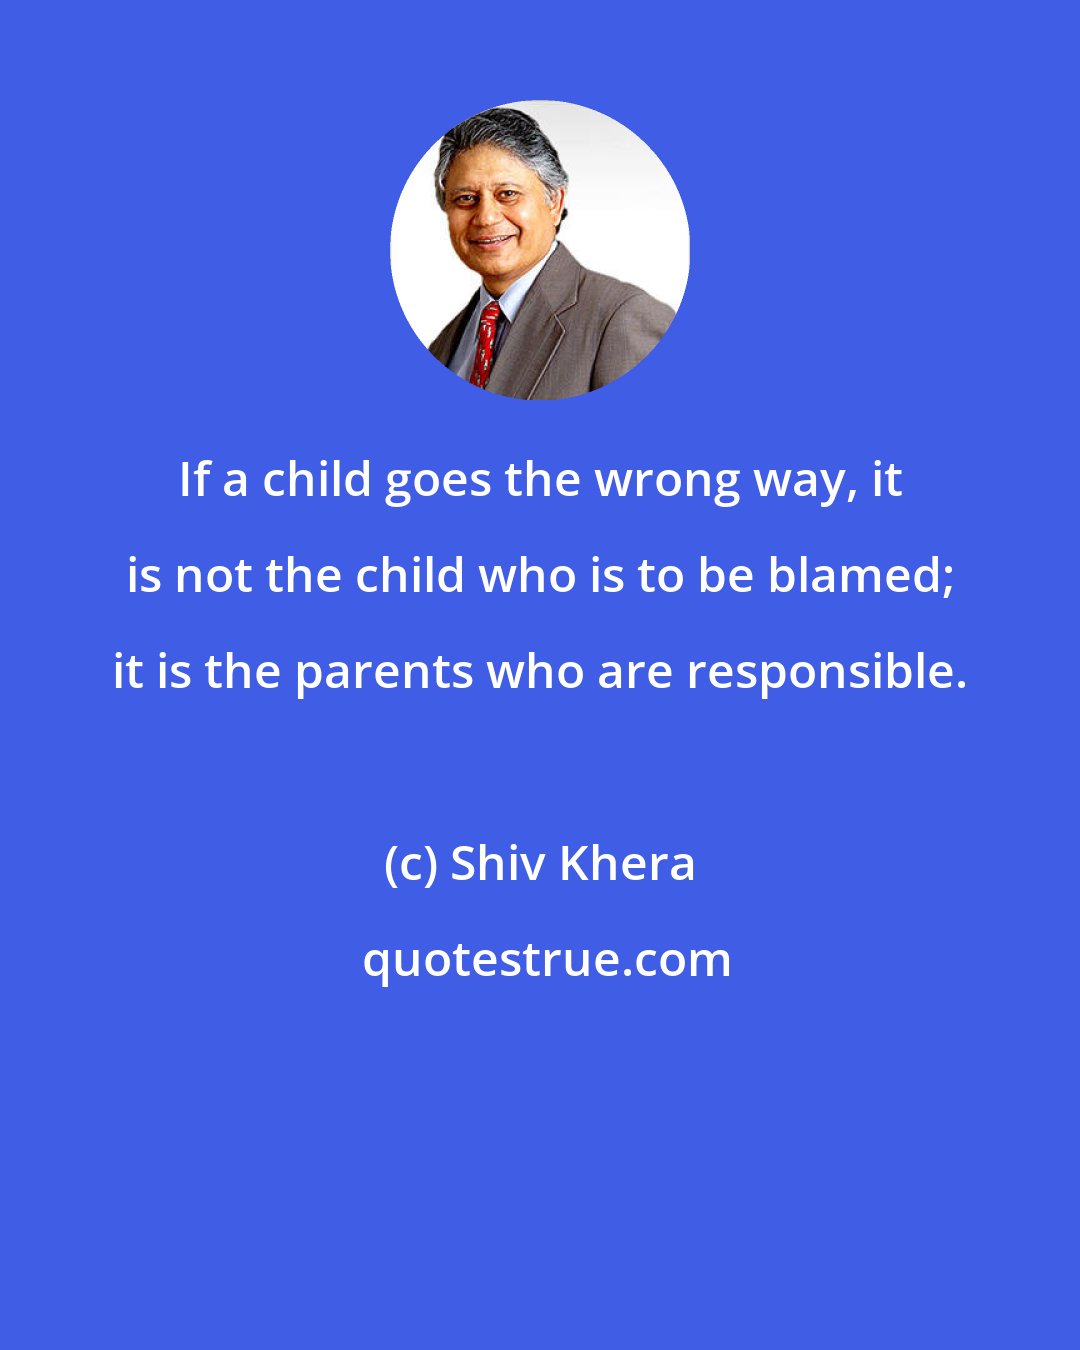 Shiv Khera: If a child goes the wrong way, it is not the child who is to be blamed; it is the parents who are responsible.